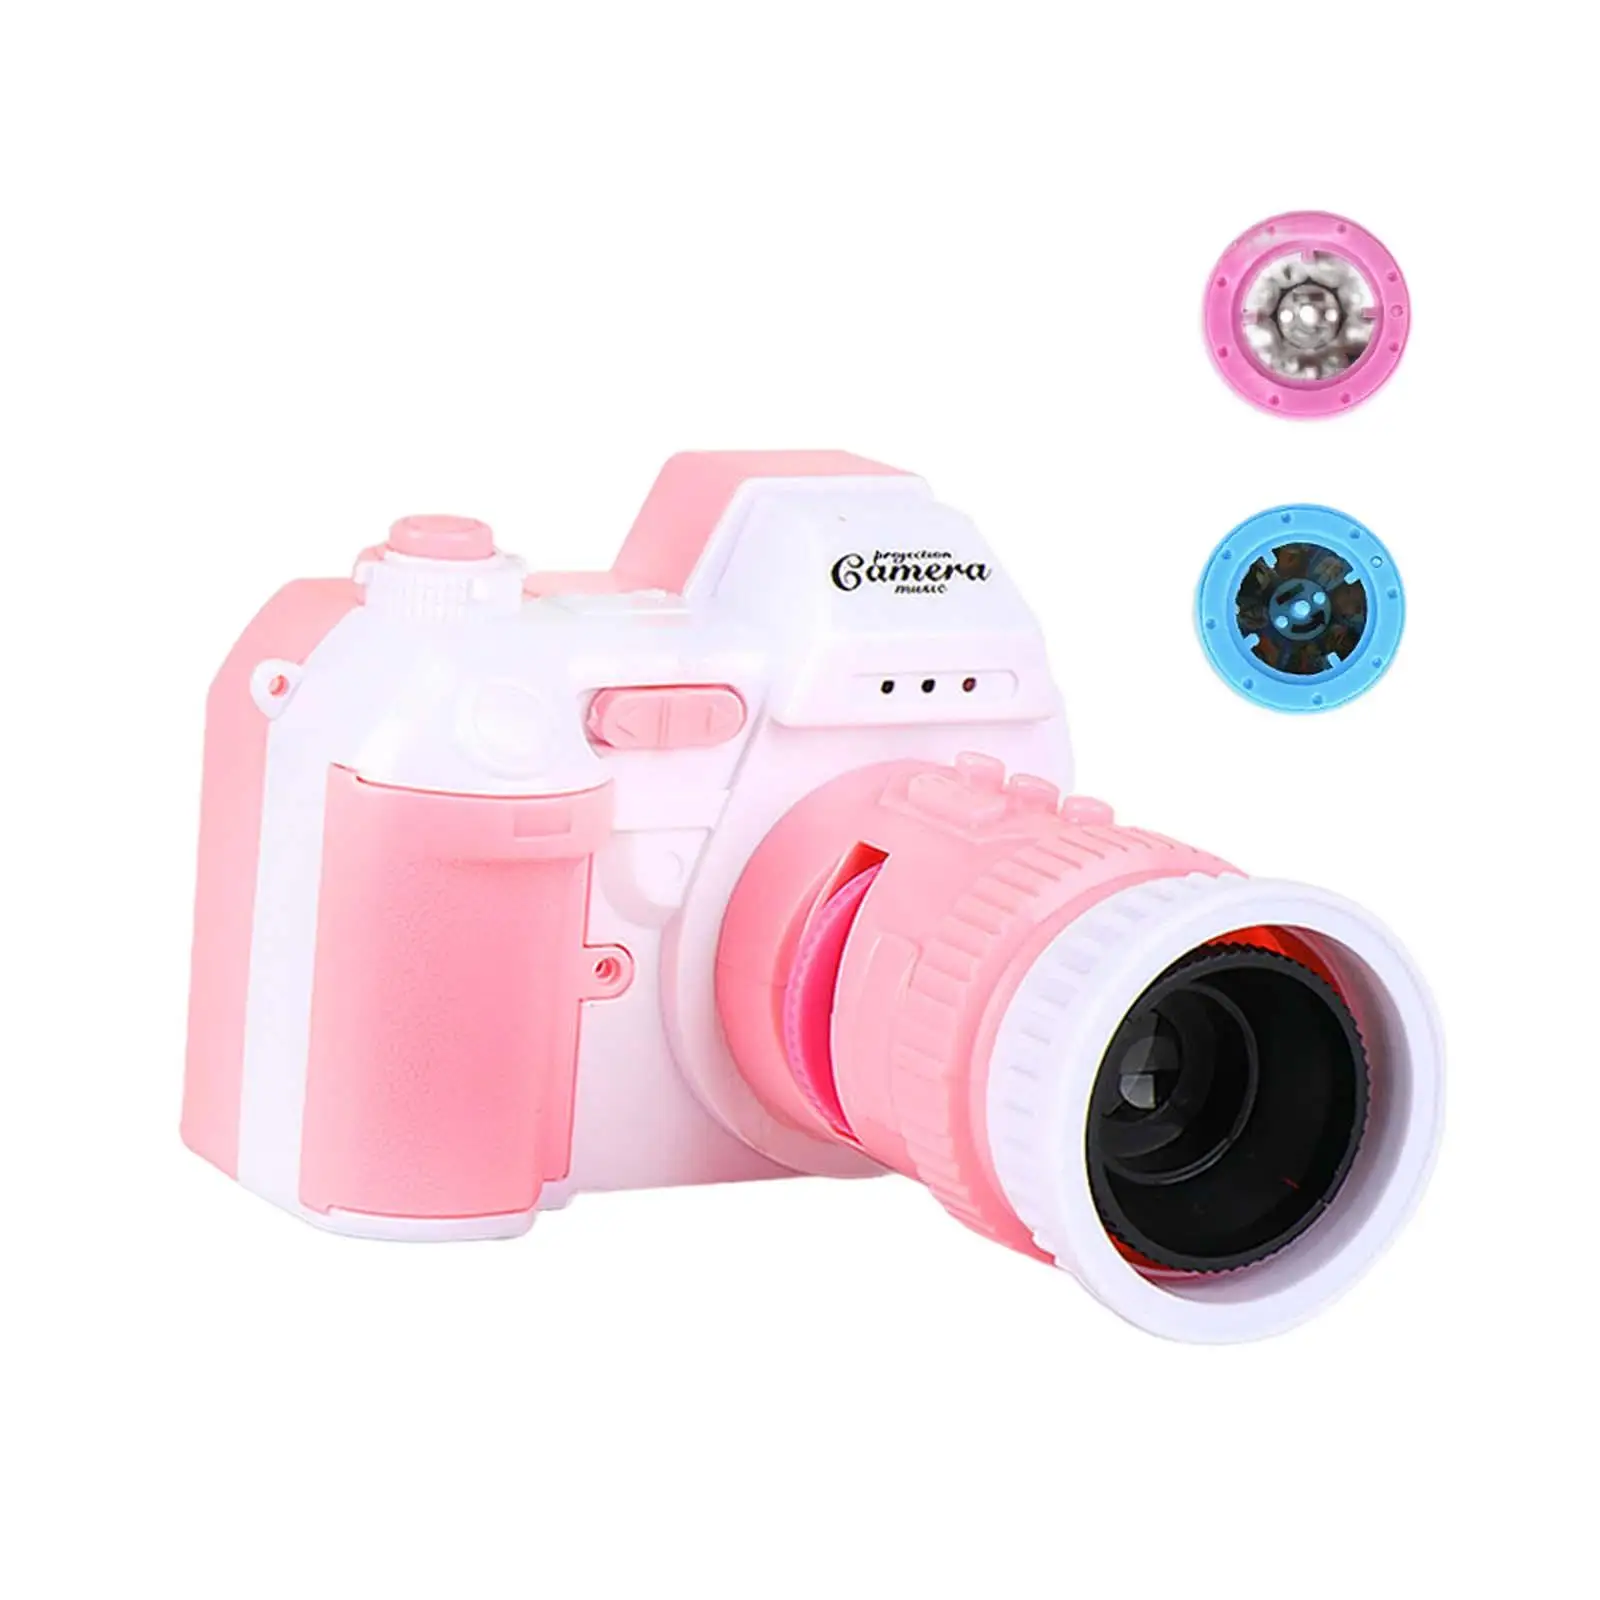 Mini Projection Camera Toy Educational Toy for Holiday Children Day Age 3+